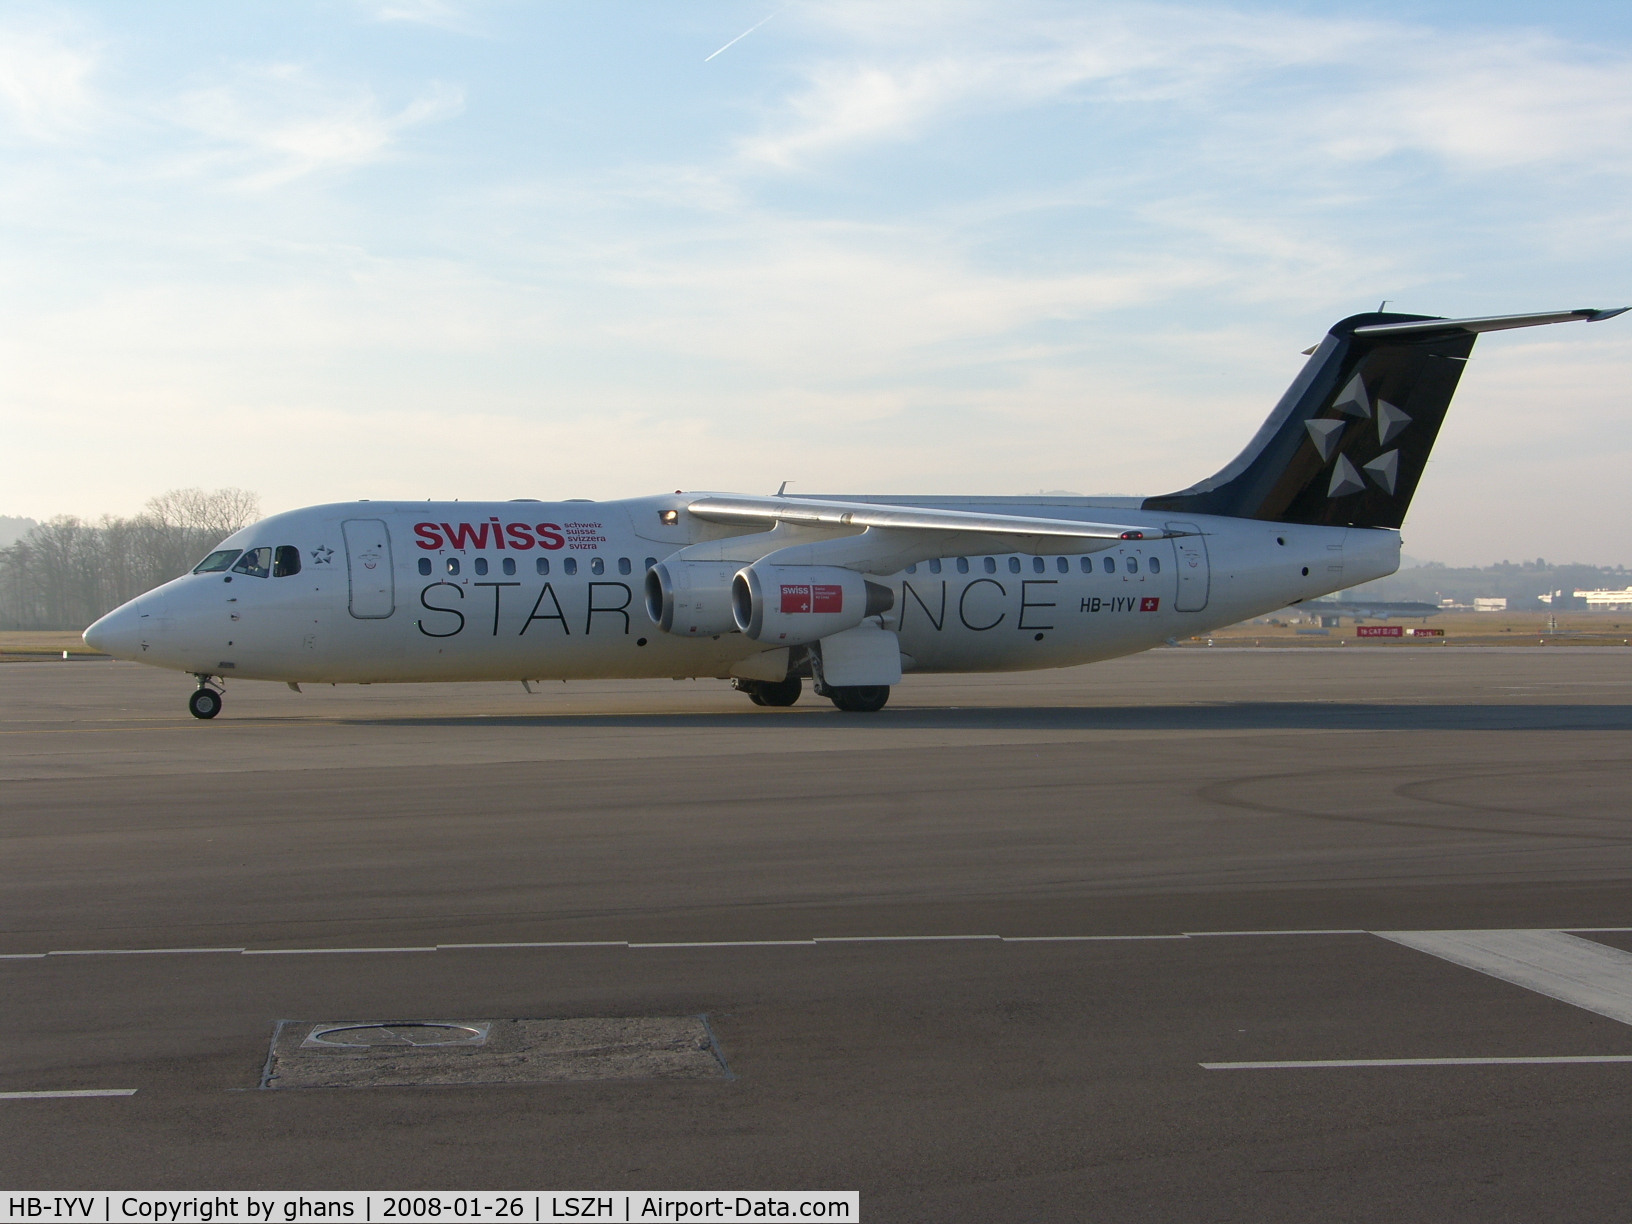 HB-IYV, 2000 British Aerospace Avro 146-RJ100 C/N E3377, Swiss is also a member of the Star Alliance